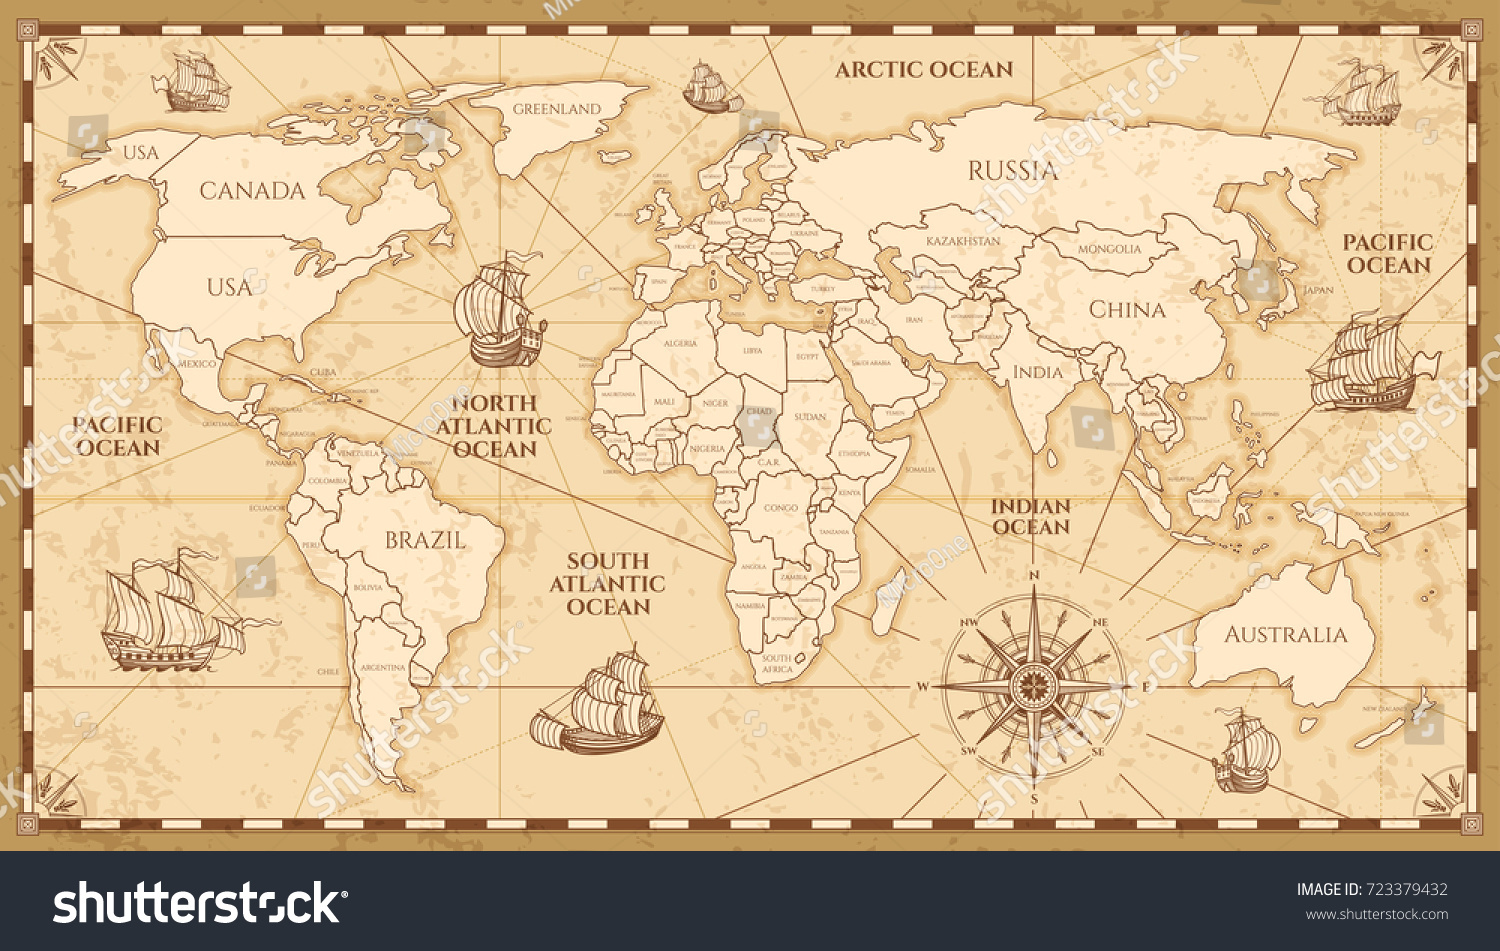 Vector antique world map with countries boundaries. Antique world vintage map, grunge america and europe illustration #723379432